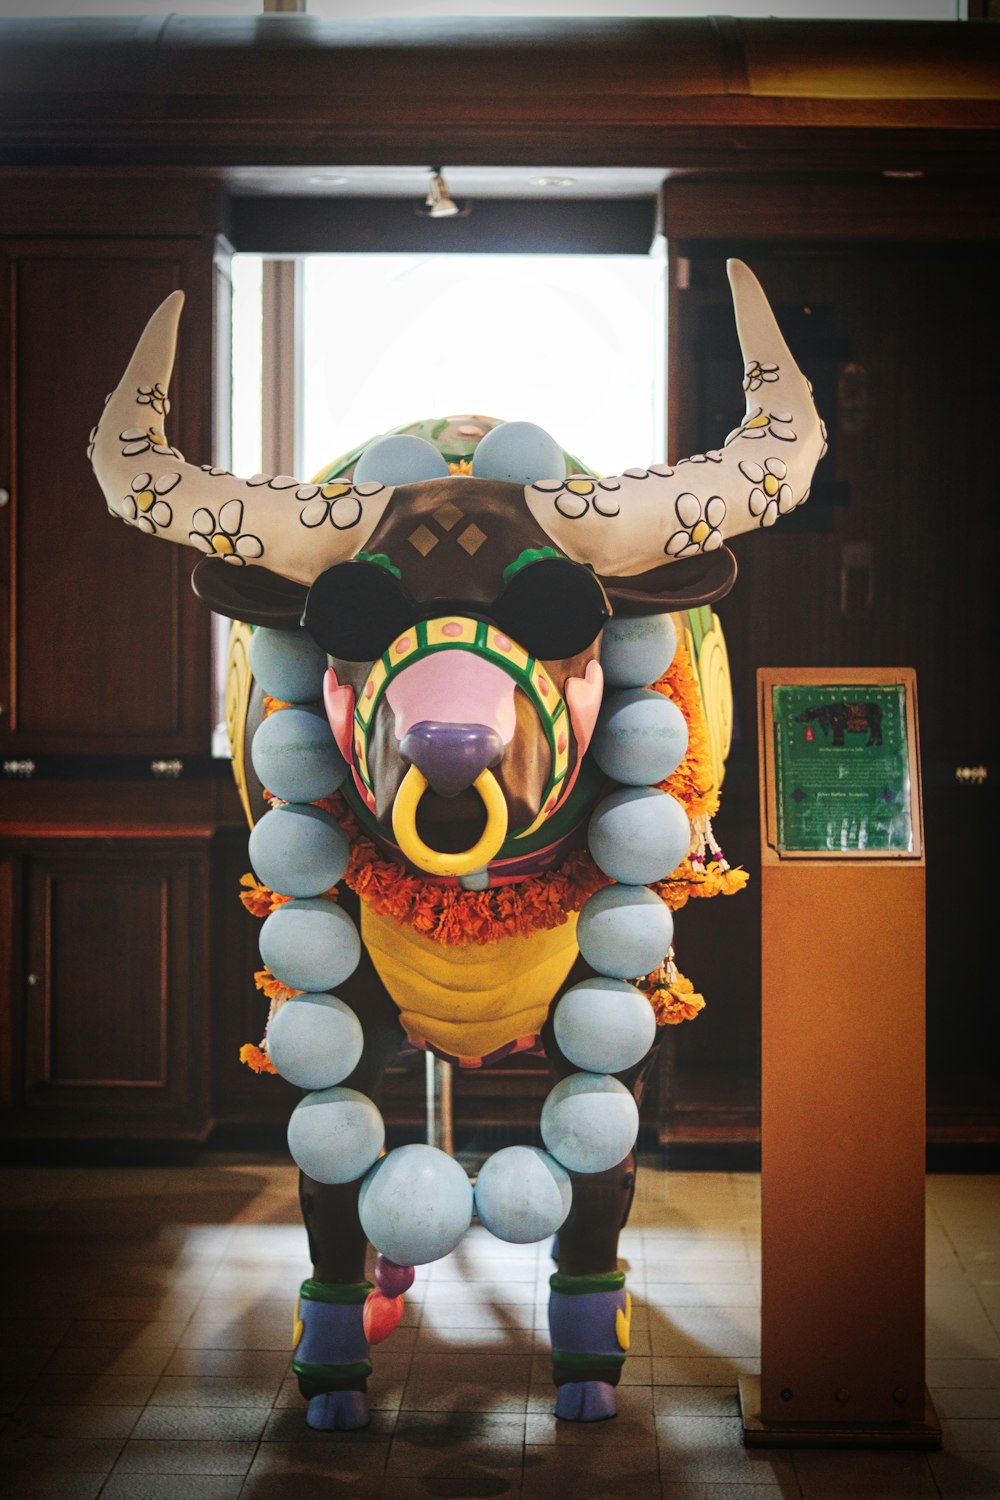 a large balloon sculpture of a bull with horns